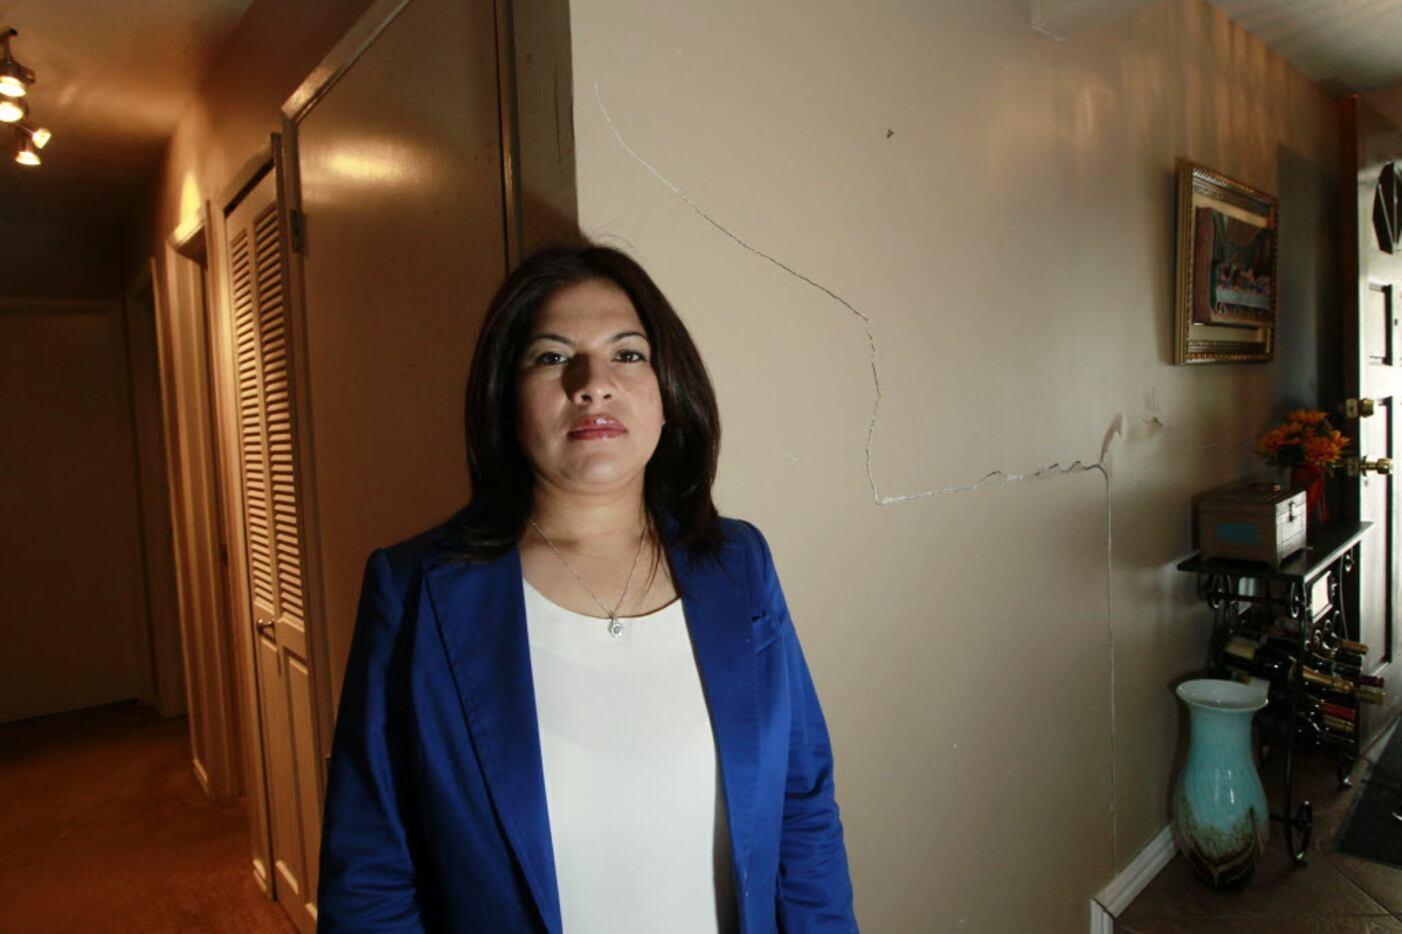 Maria Cazares is one of more than 200 plaintiffs claiming the LBJ Express project ruined her...